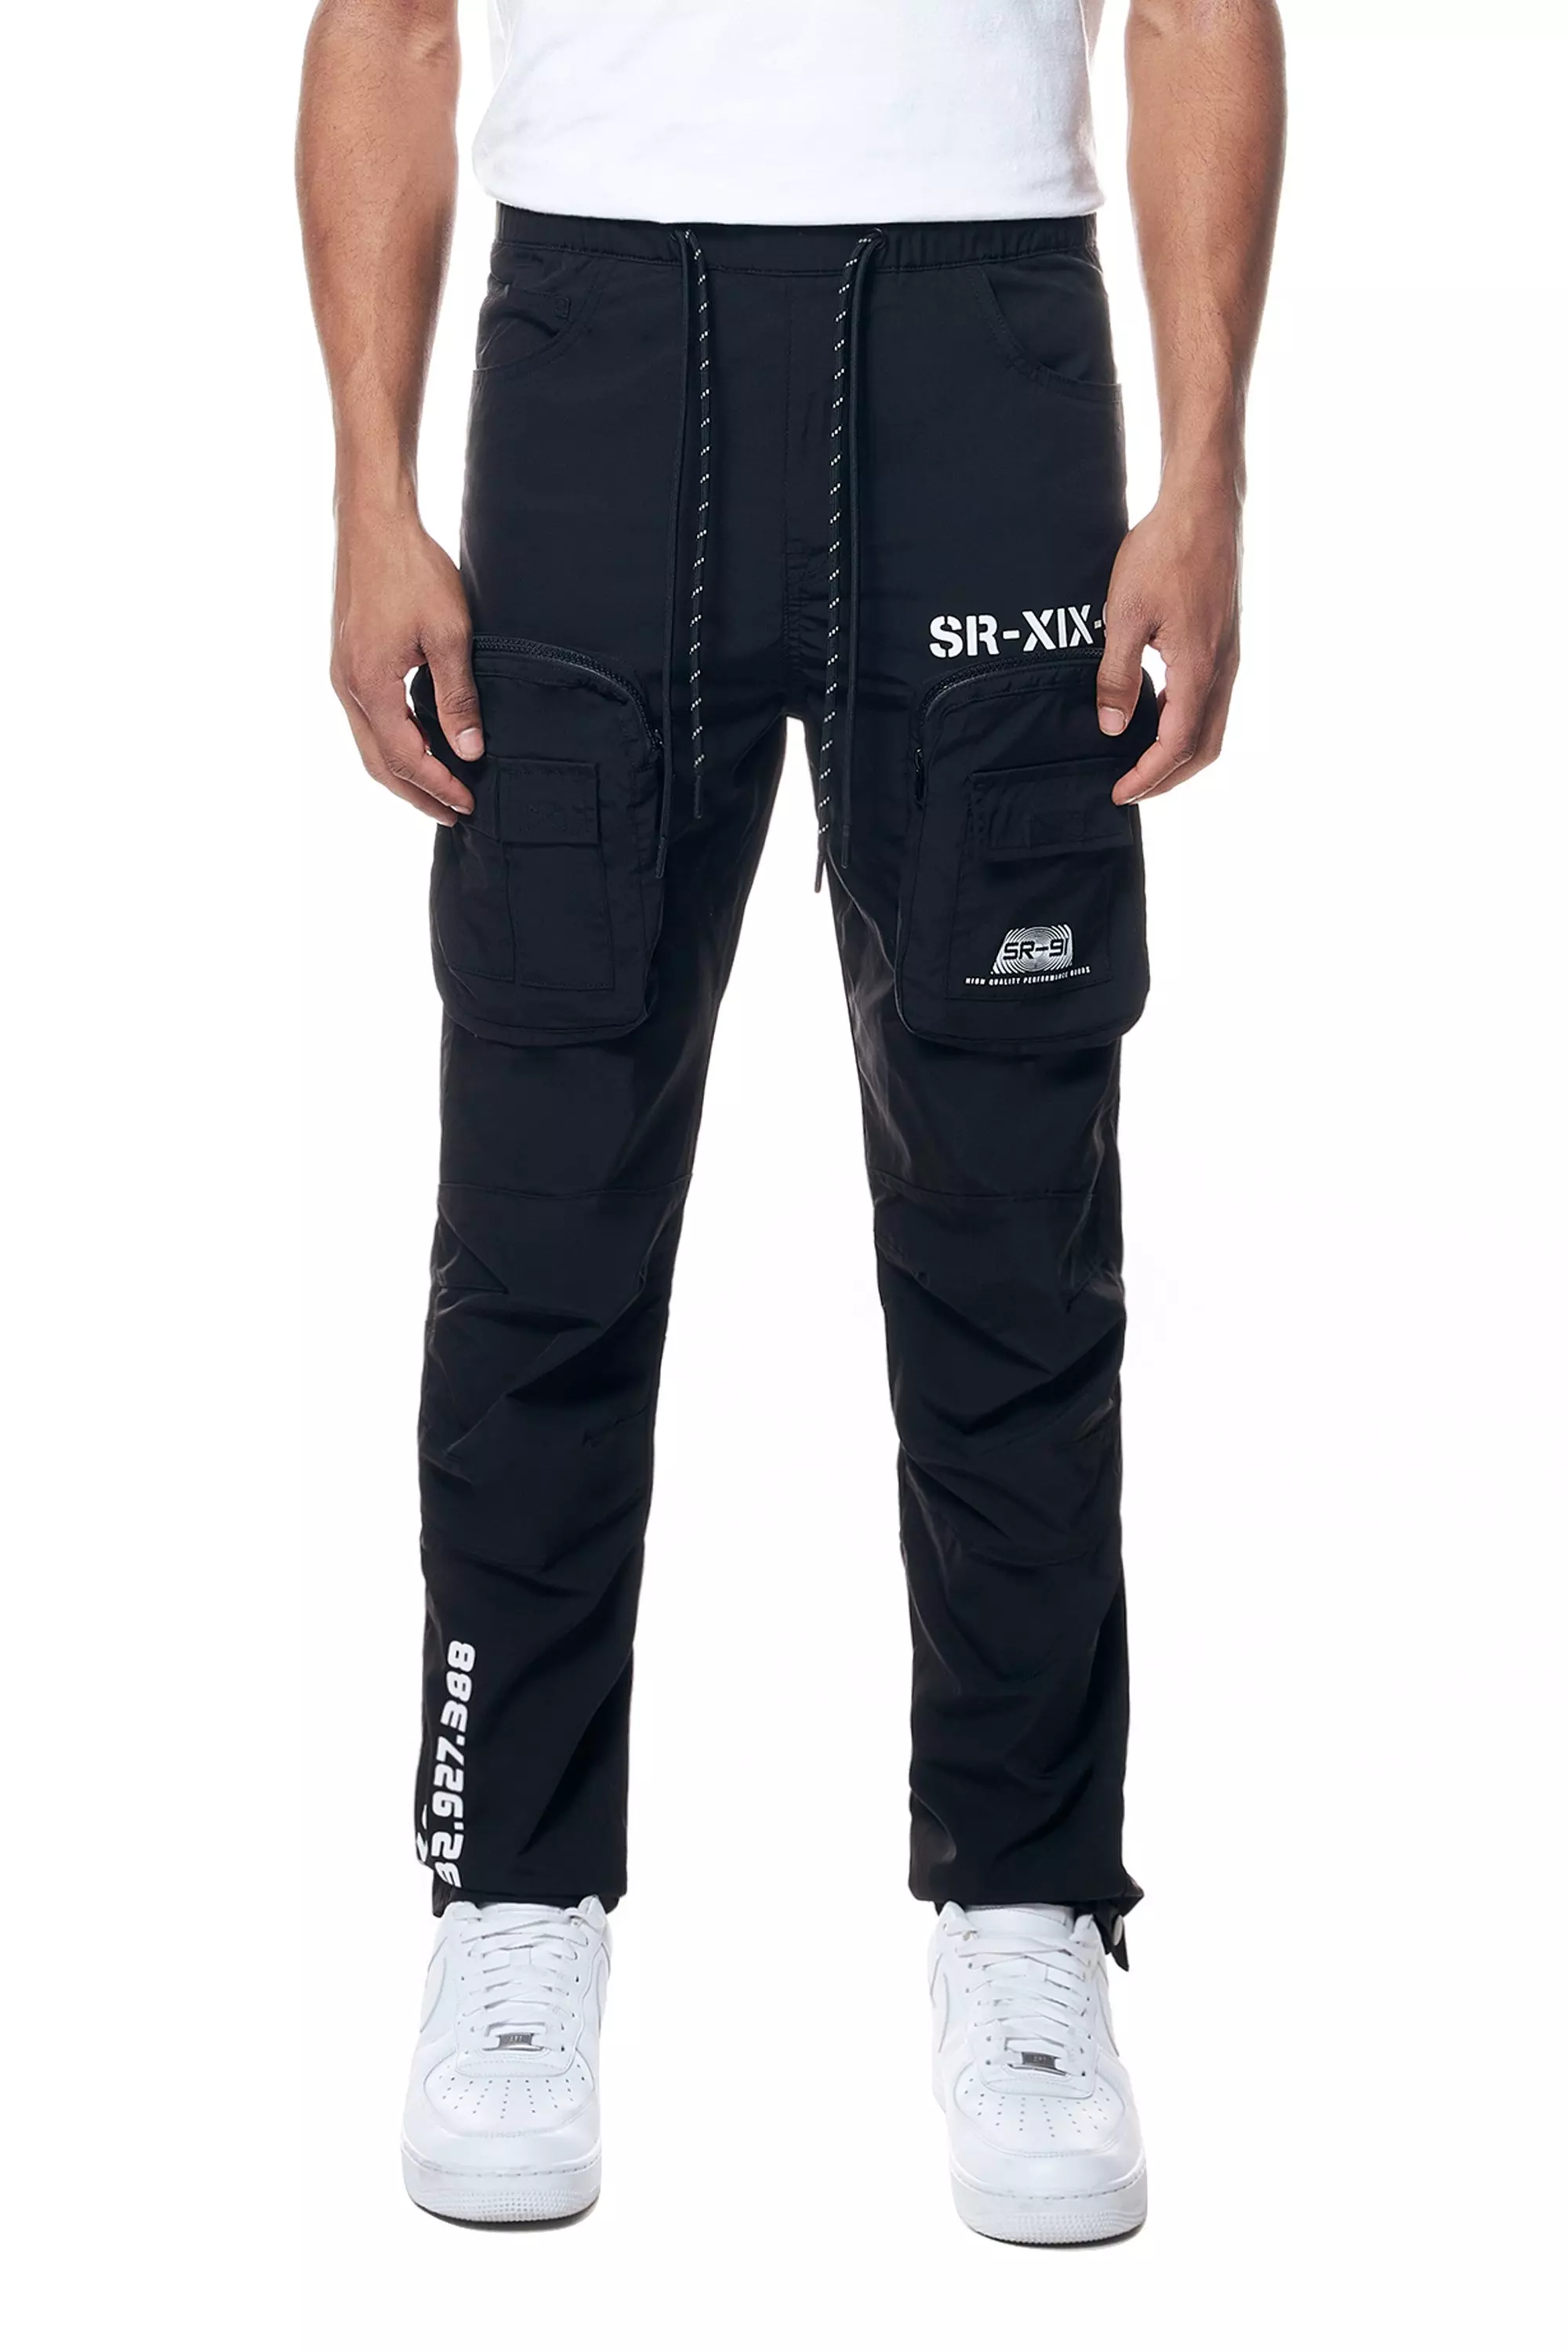 all in motion, Pants, Nwt Mens Utility Jogger Pants By All In Motion